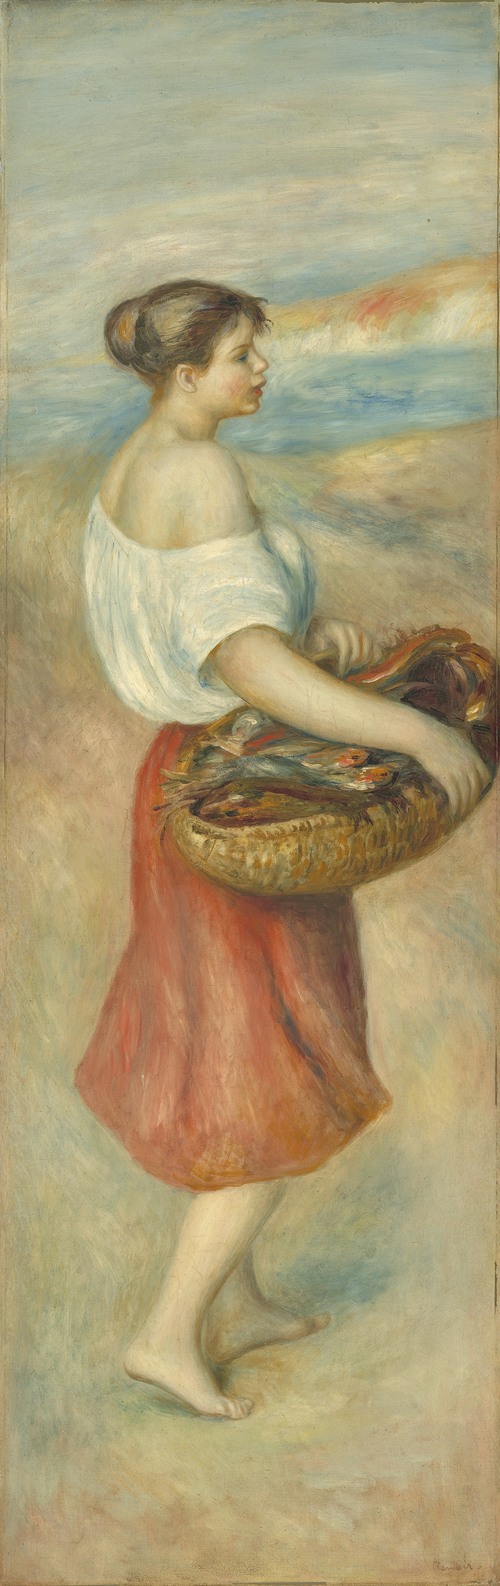 Girl with a Basket of Fish (c. 1889)